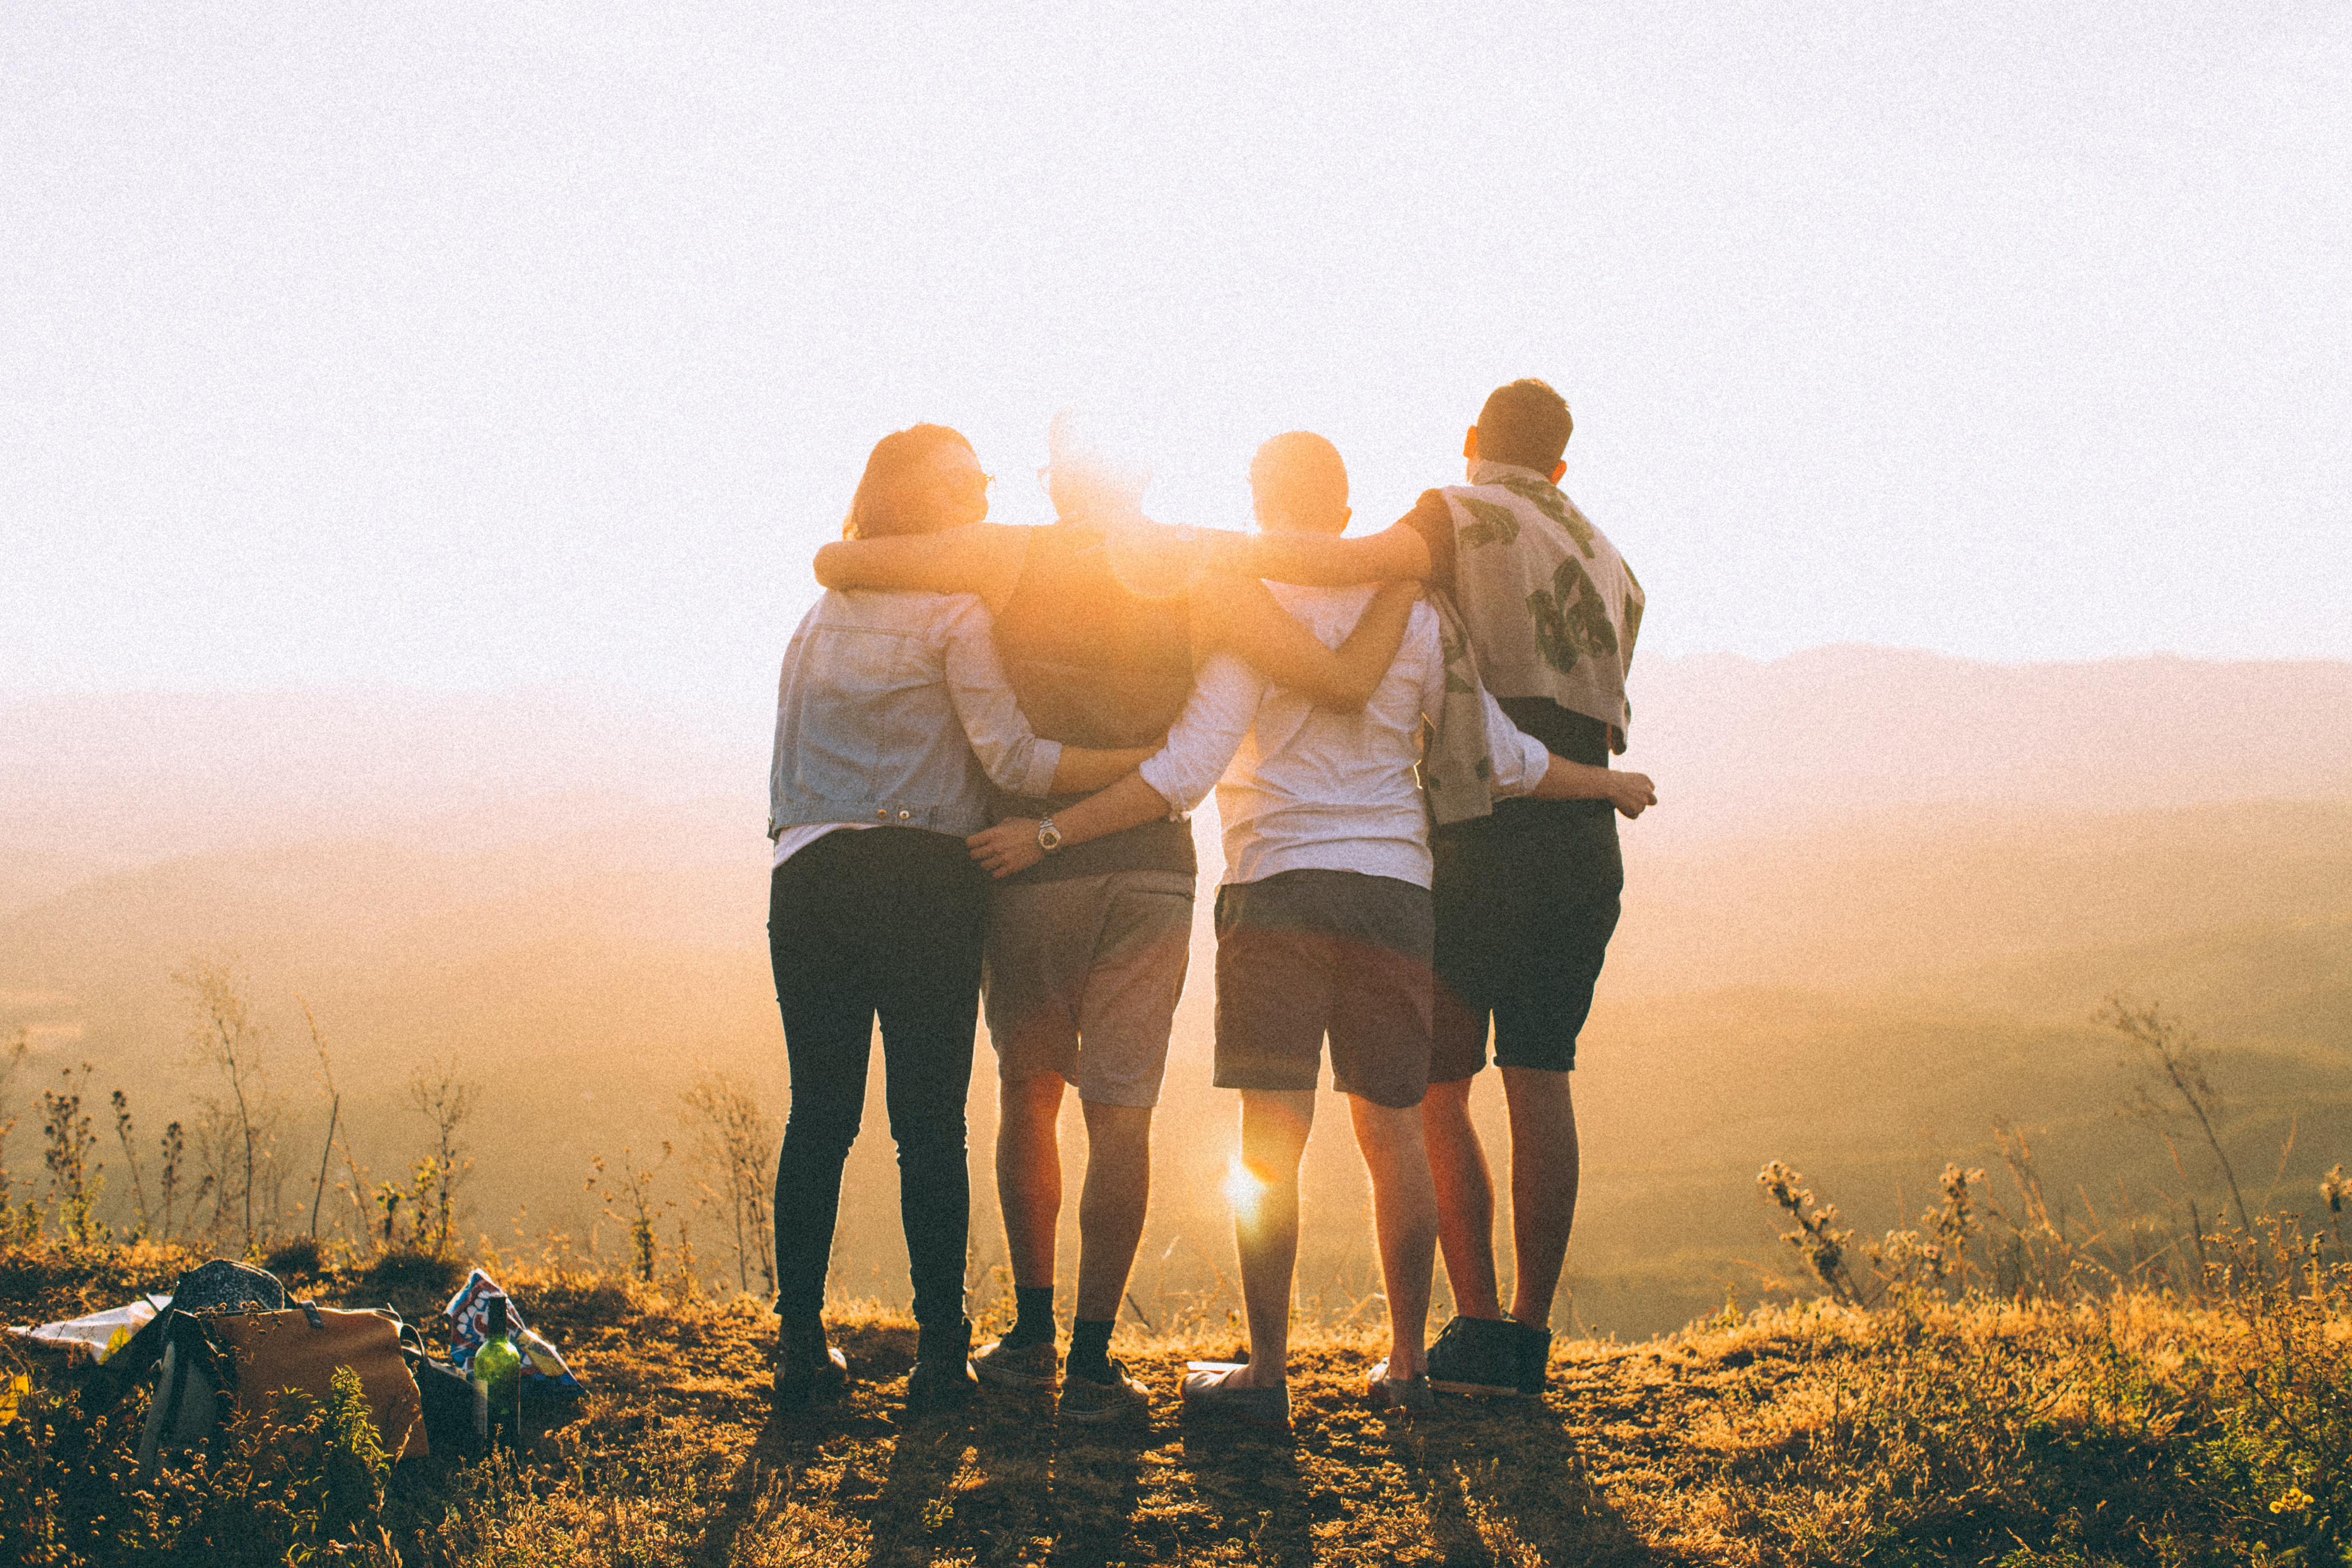 Four people on a hilltop watching the sunset, though it looks more like they're staring directly at the full sun since it's pretty far from the horizon